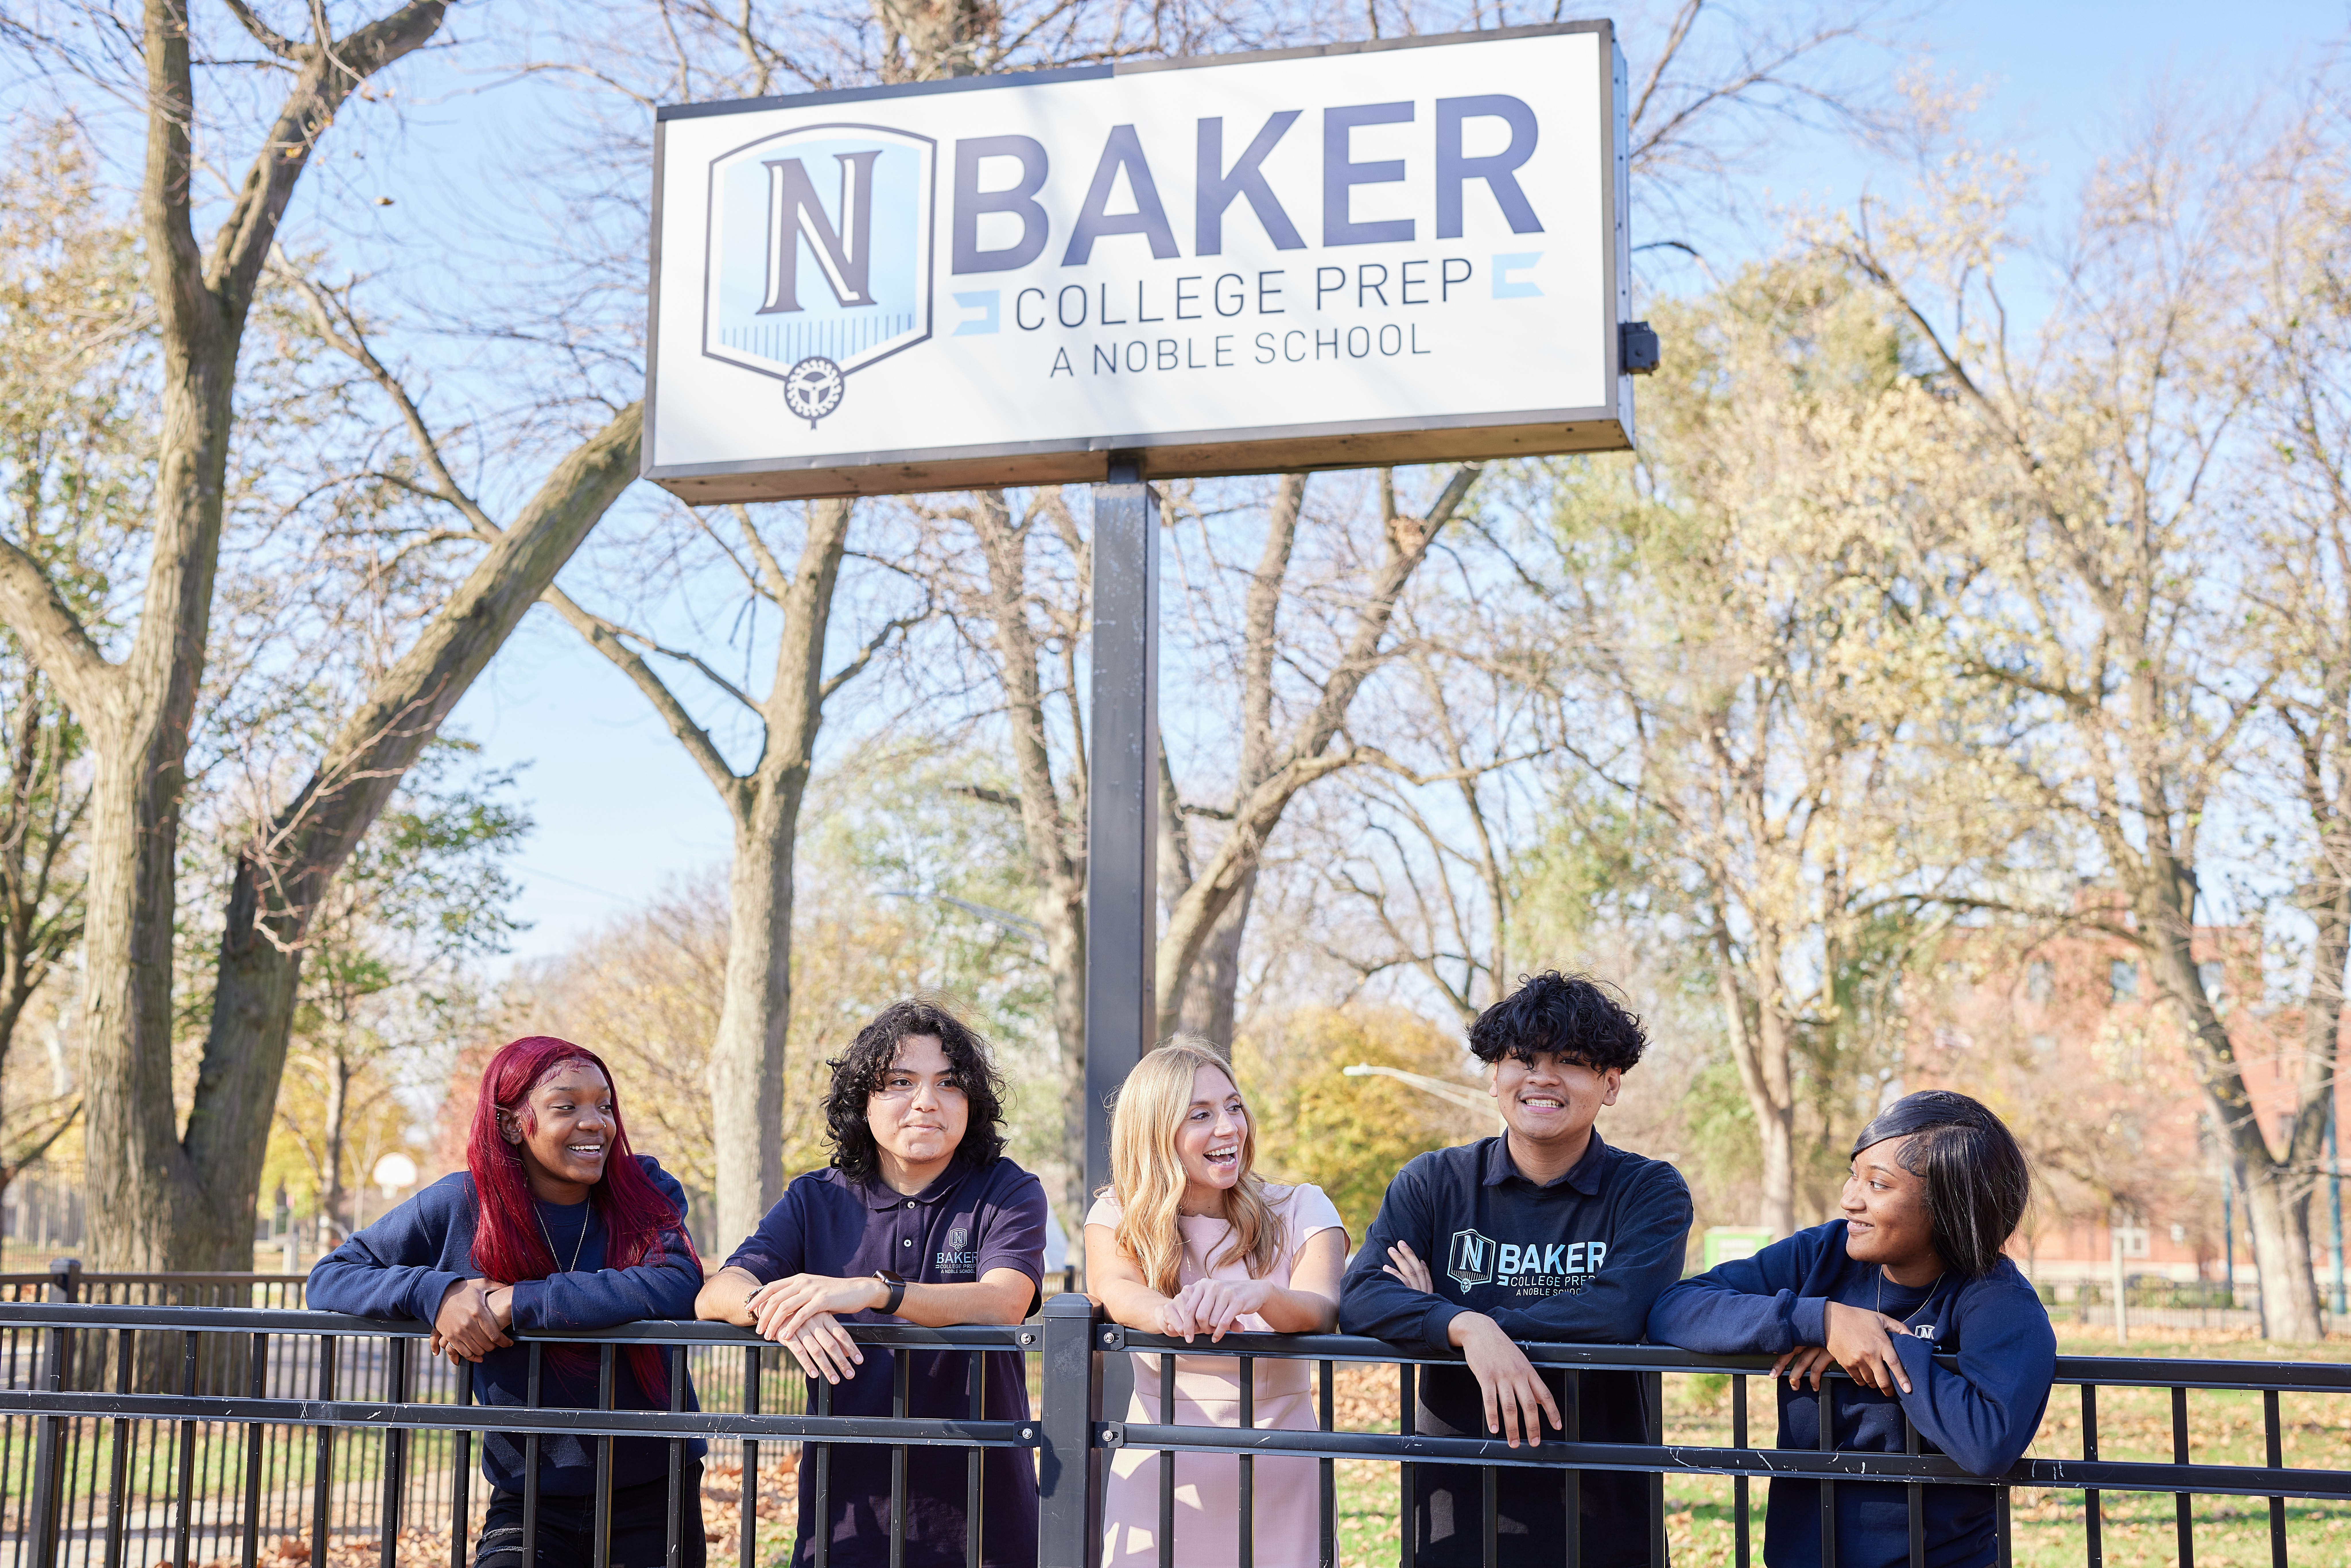 Photo shows four Baker College Prep students and their principal Mary Arrigo standing outside beneath the Baker College Prep school sign. They are smiling and look like they are talking to each other. They lean against a black fence in front of them.